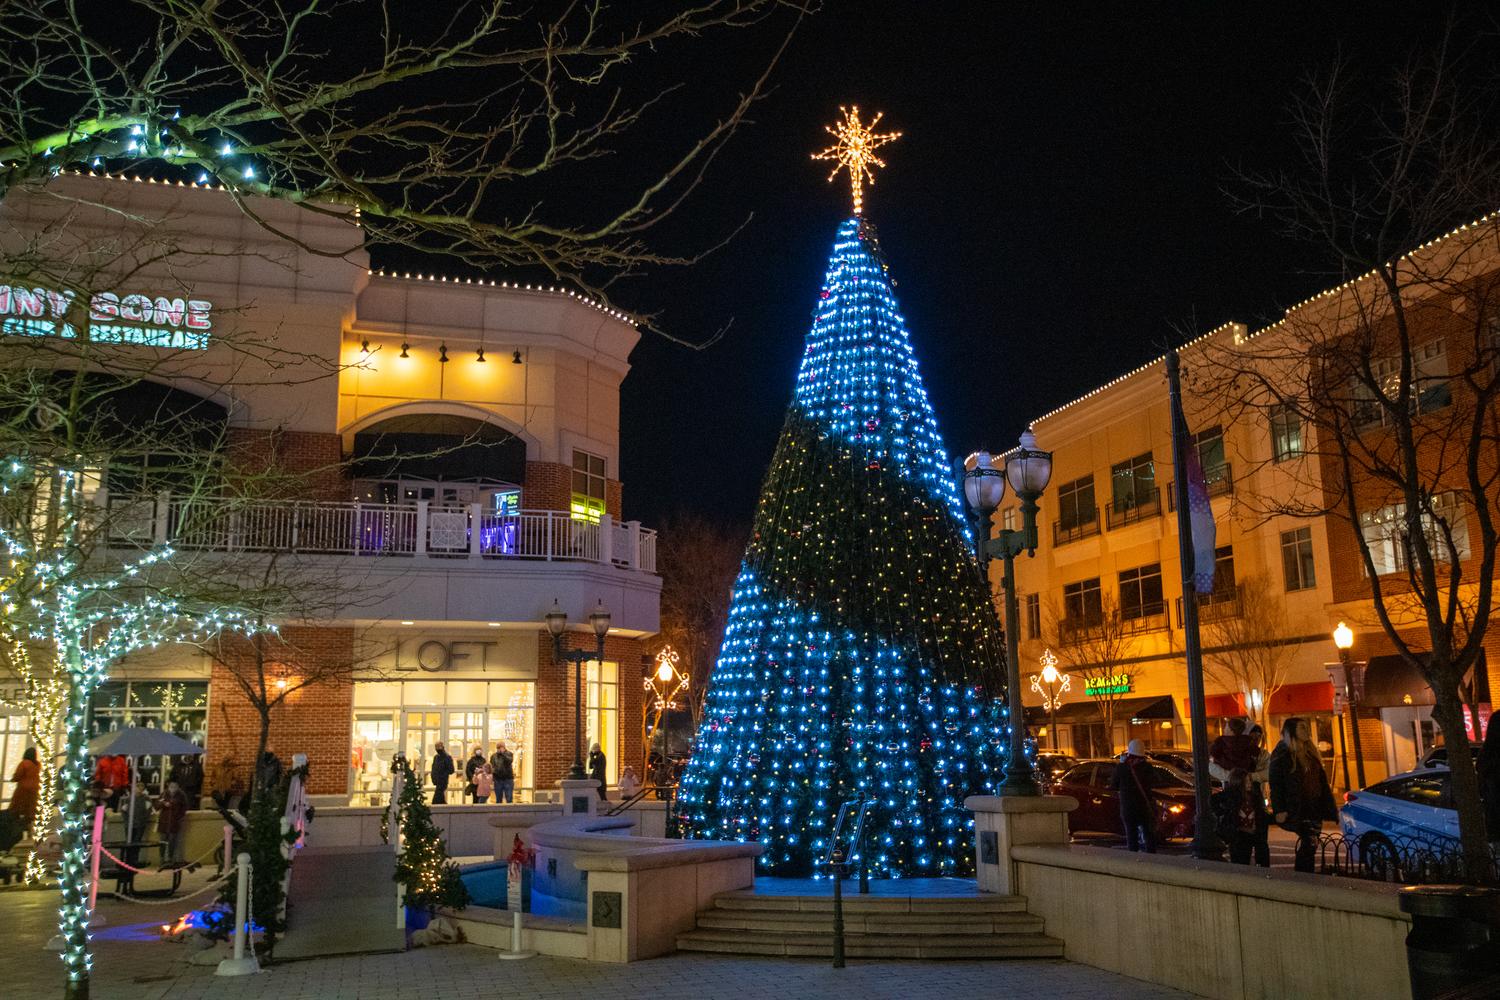 Festive outdoor shopping plaza with a beautifully lit tree